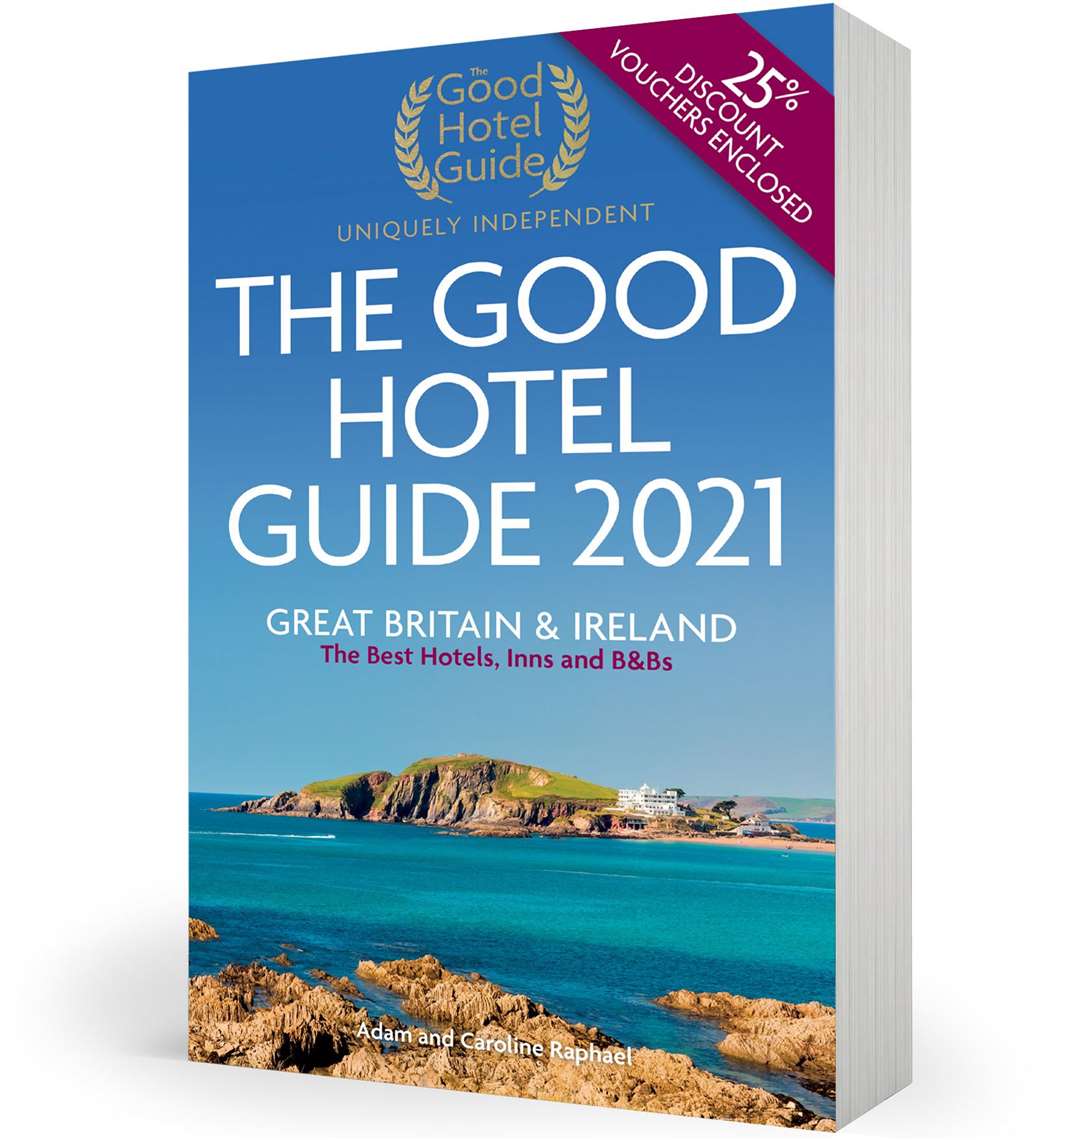 Hotels and B&Bs across Kent have made it into the Good Hotel Guide 2021